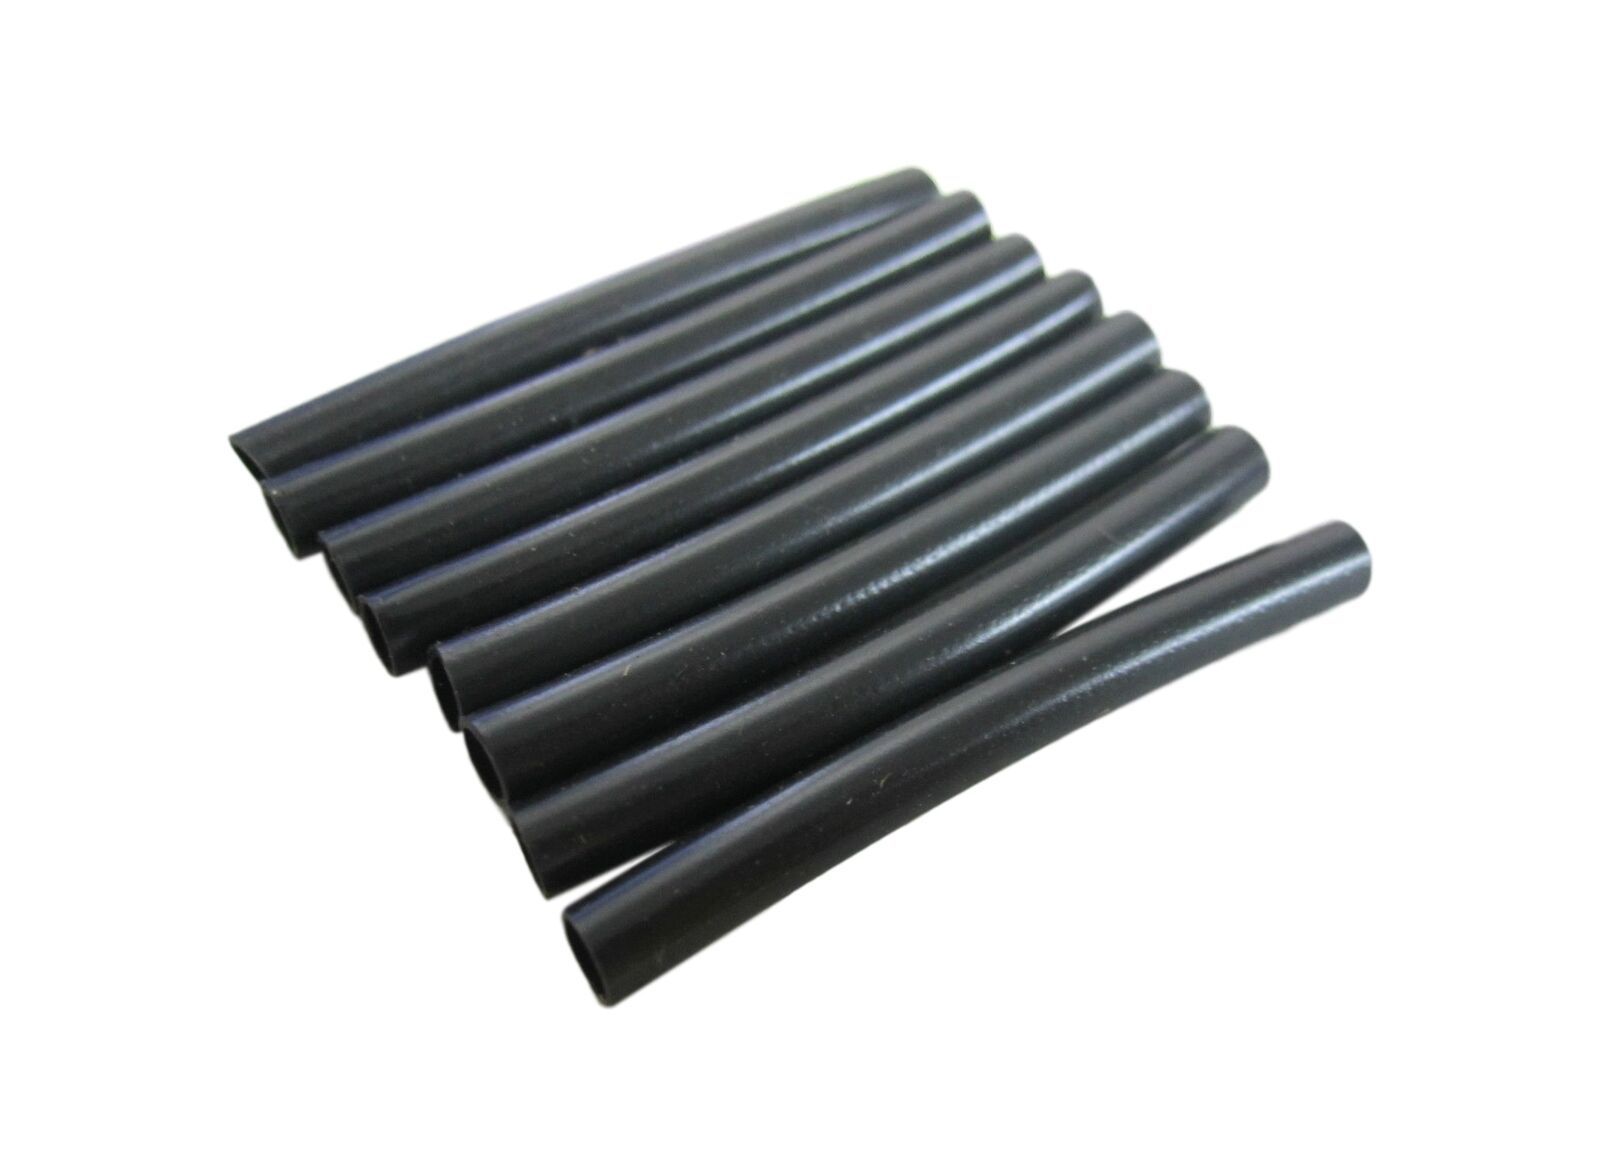 Carquest STT260 STT 260 1/8" Heat Shrink Tubing Lot of 8 Brand New Ready To Ship - $14.09